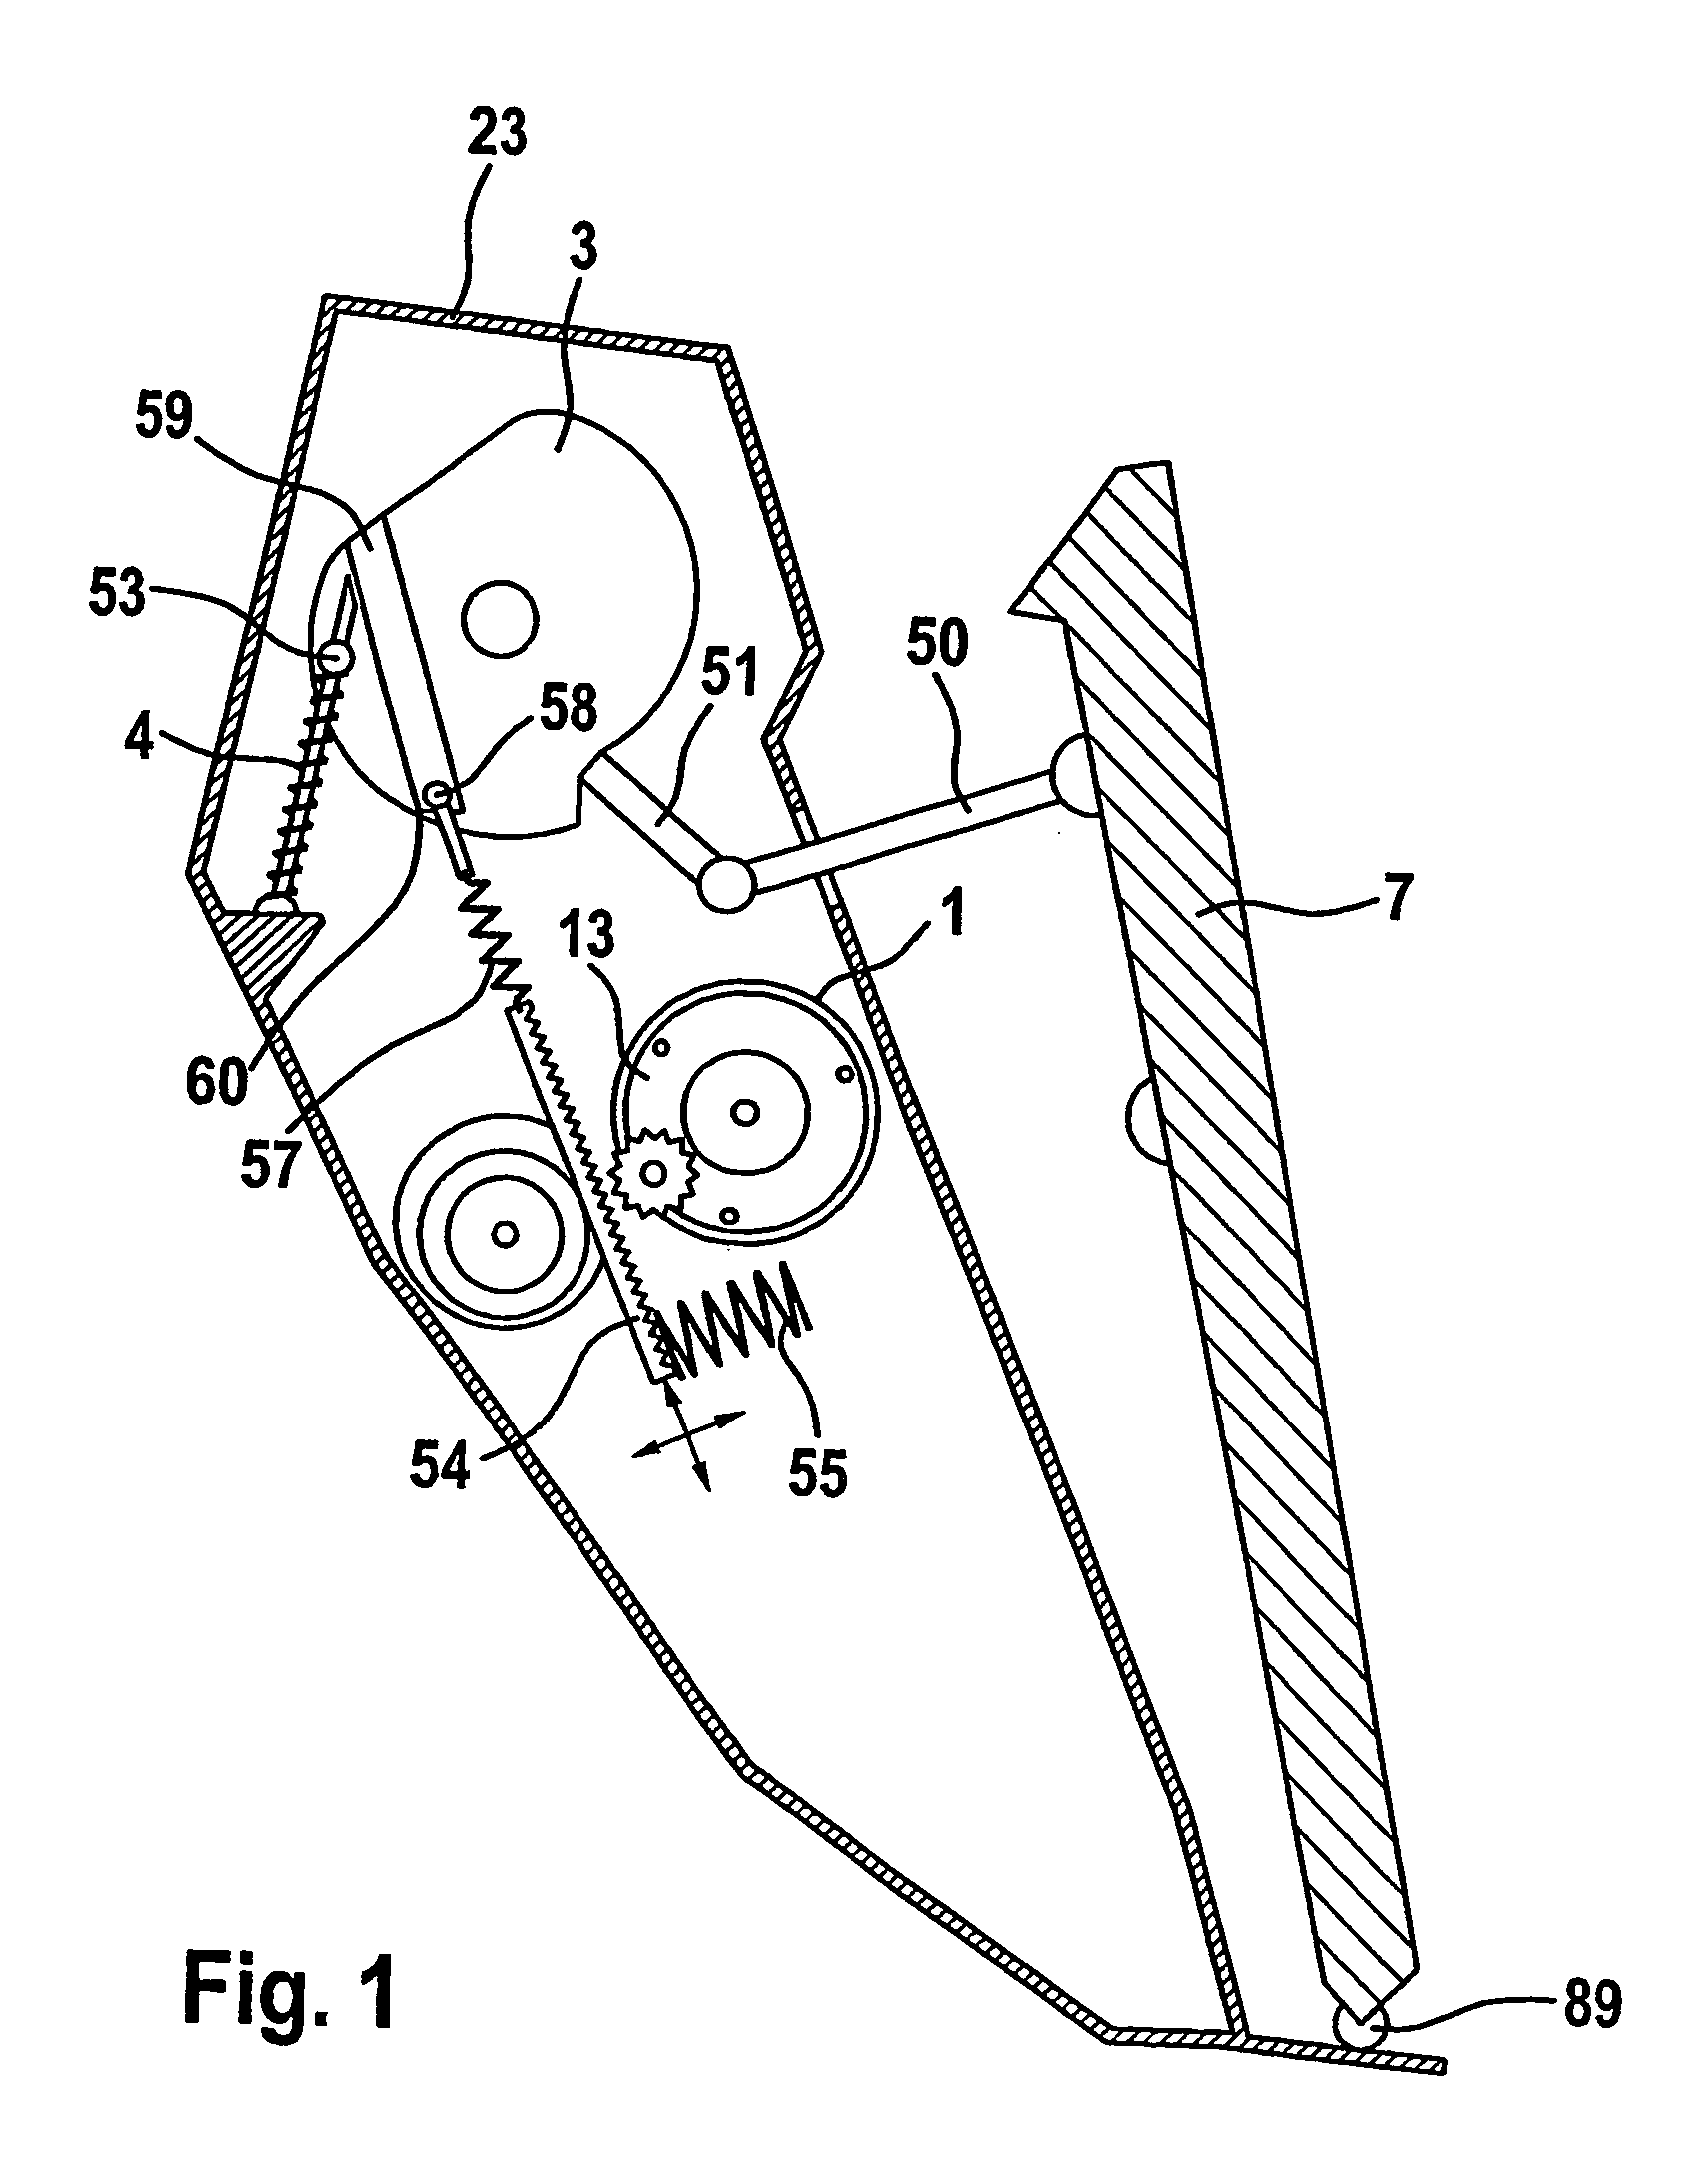 Device with additional restoring force on the gas pedal based on the deviation of a vehicle parameter from the set value